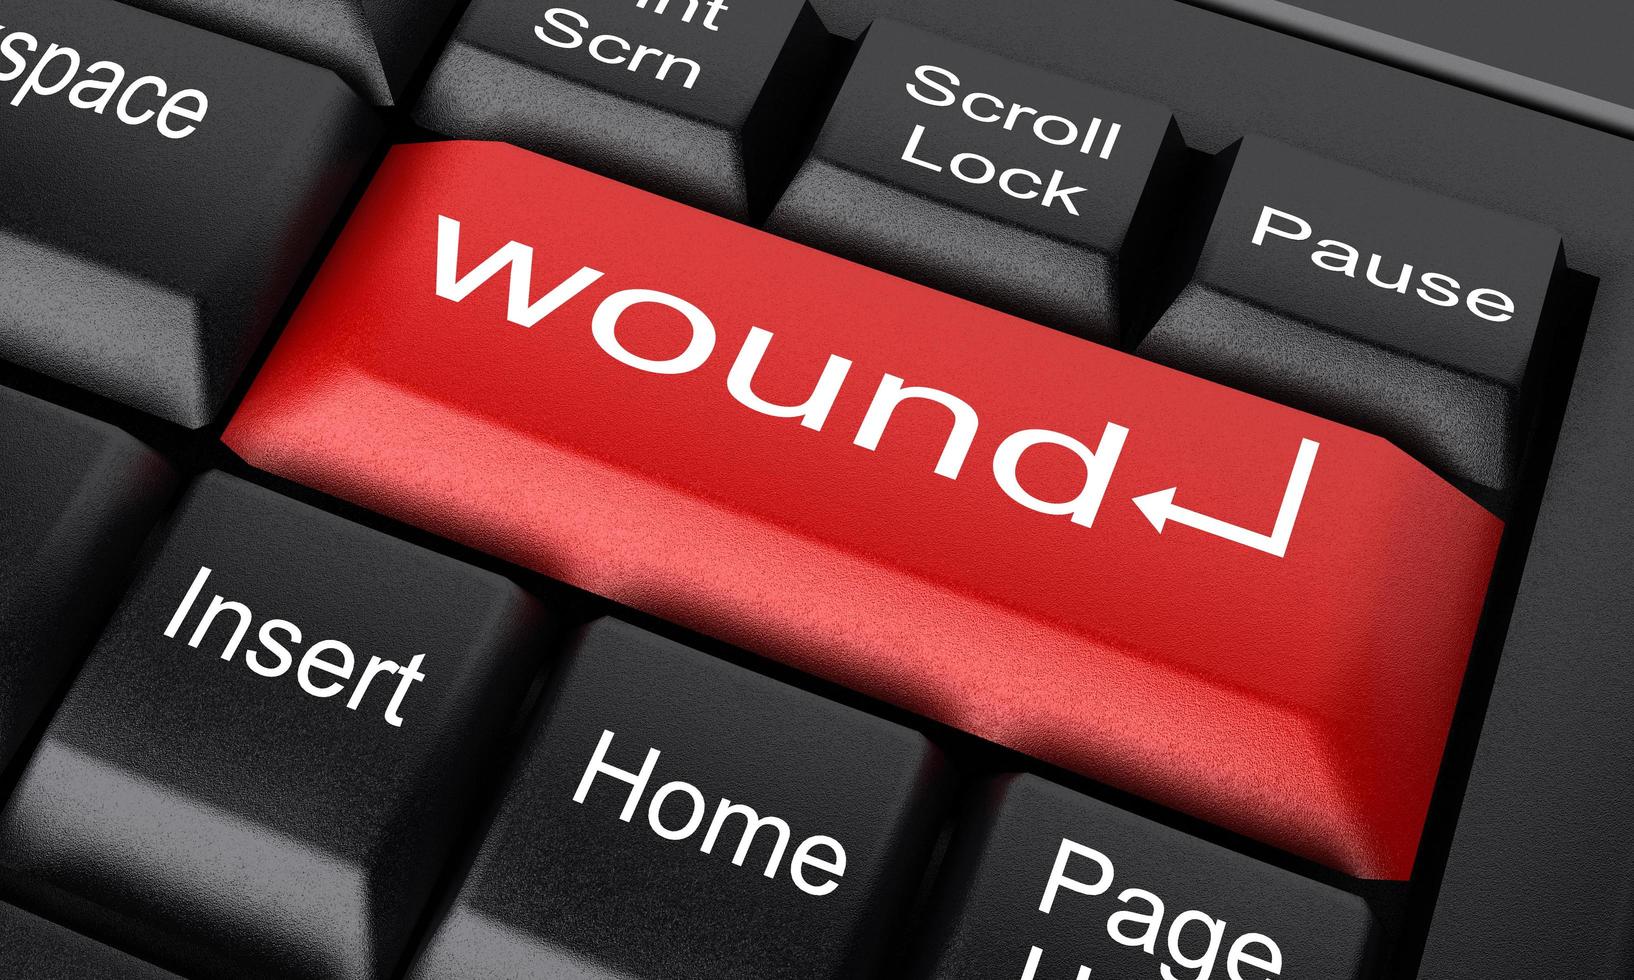 wound word on red keyboard button photo